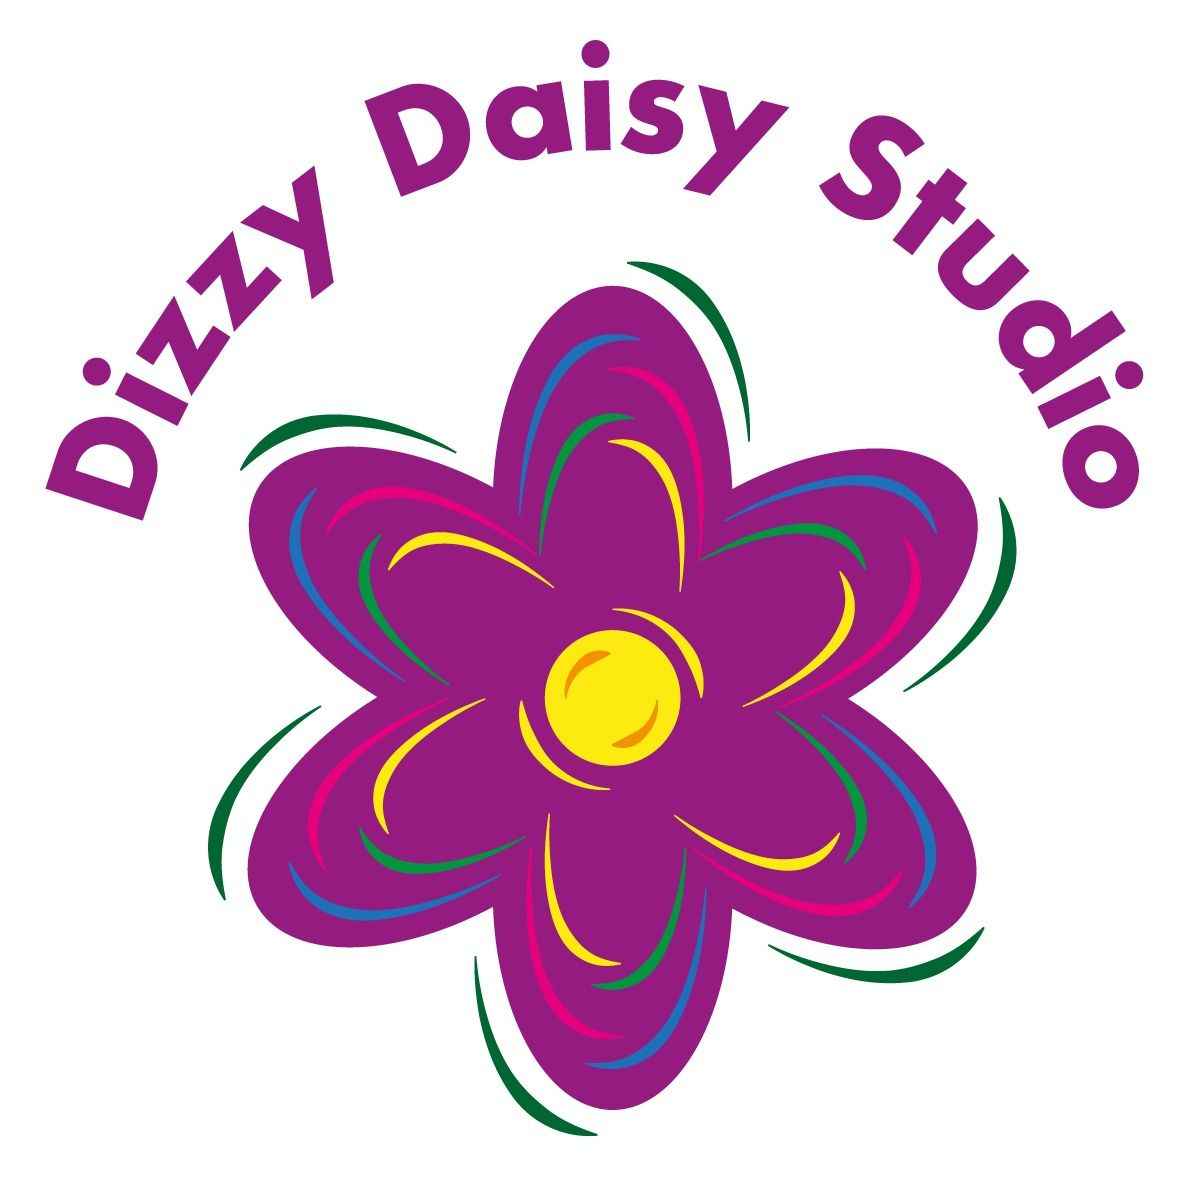 This shop is called Dizzydaisystudio 